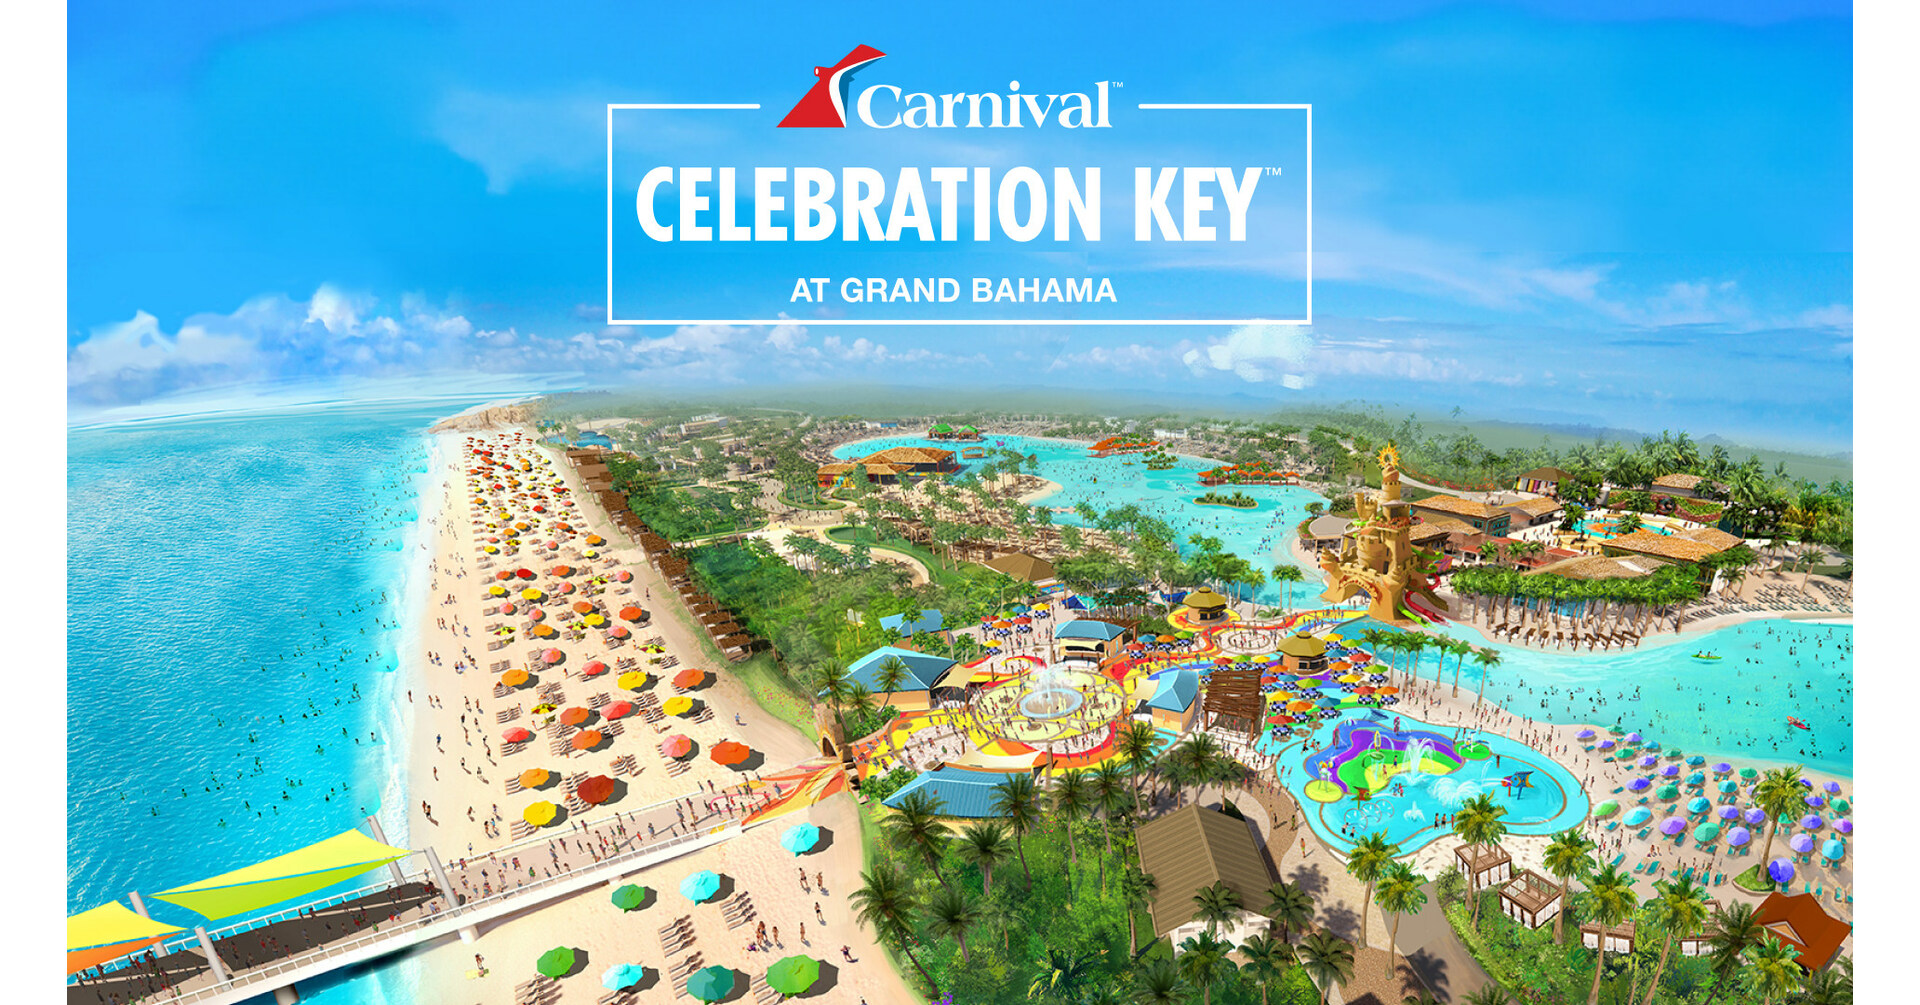 CARNIVAL CRUISE LINE OPENS ITINERARIES FEATURING CELEBRATION KEY